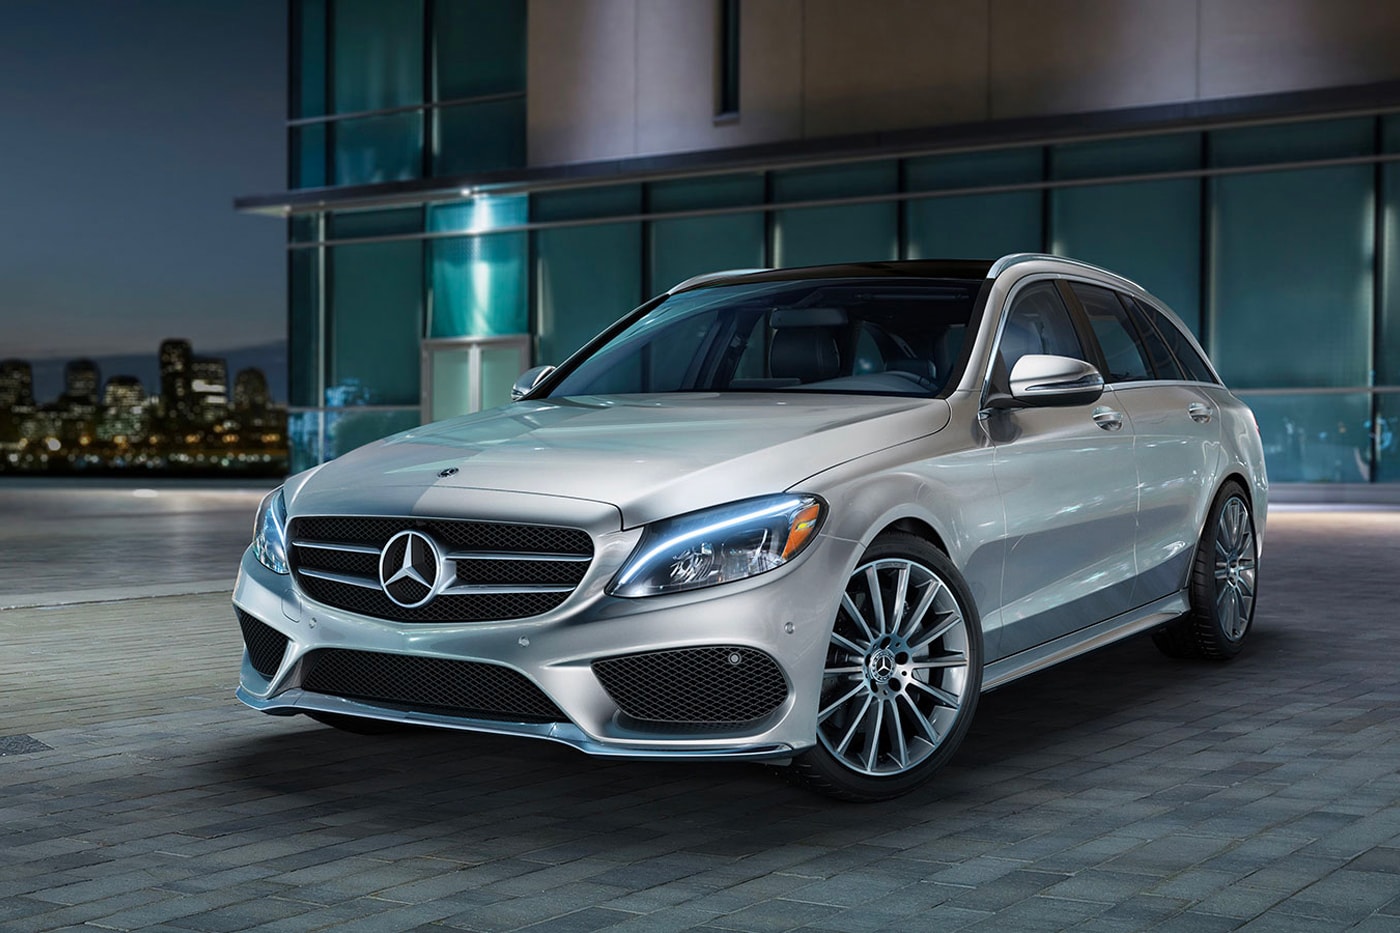 Mercedes Recalls 1.3M Cars Faulty Emergency-Call System Mercedes-Benz AG  CLA, GLA, GLE, GLS, SLC, A, GT, C, E, S, CLS, SL, B, GLB, GLC, and G Automaker National Highway Traffic Safety Administration